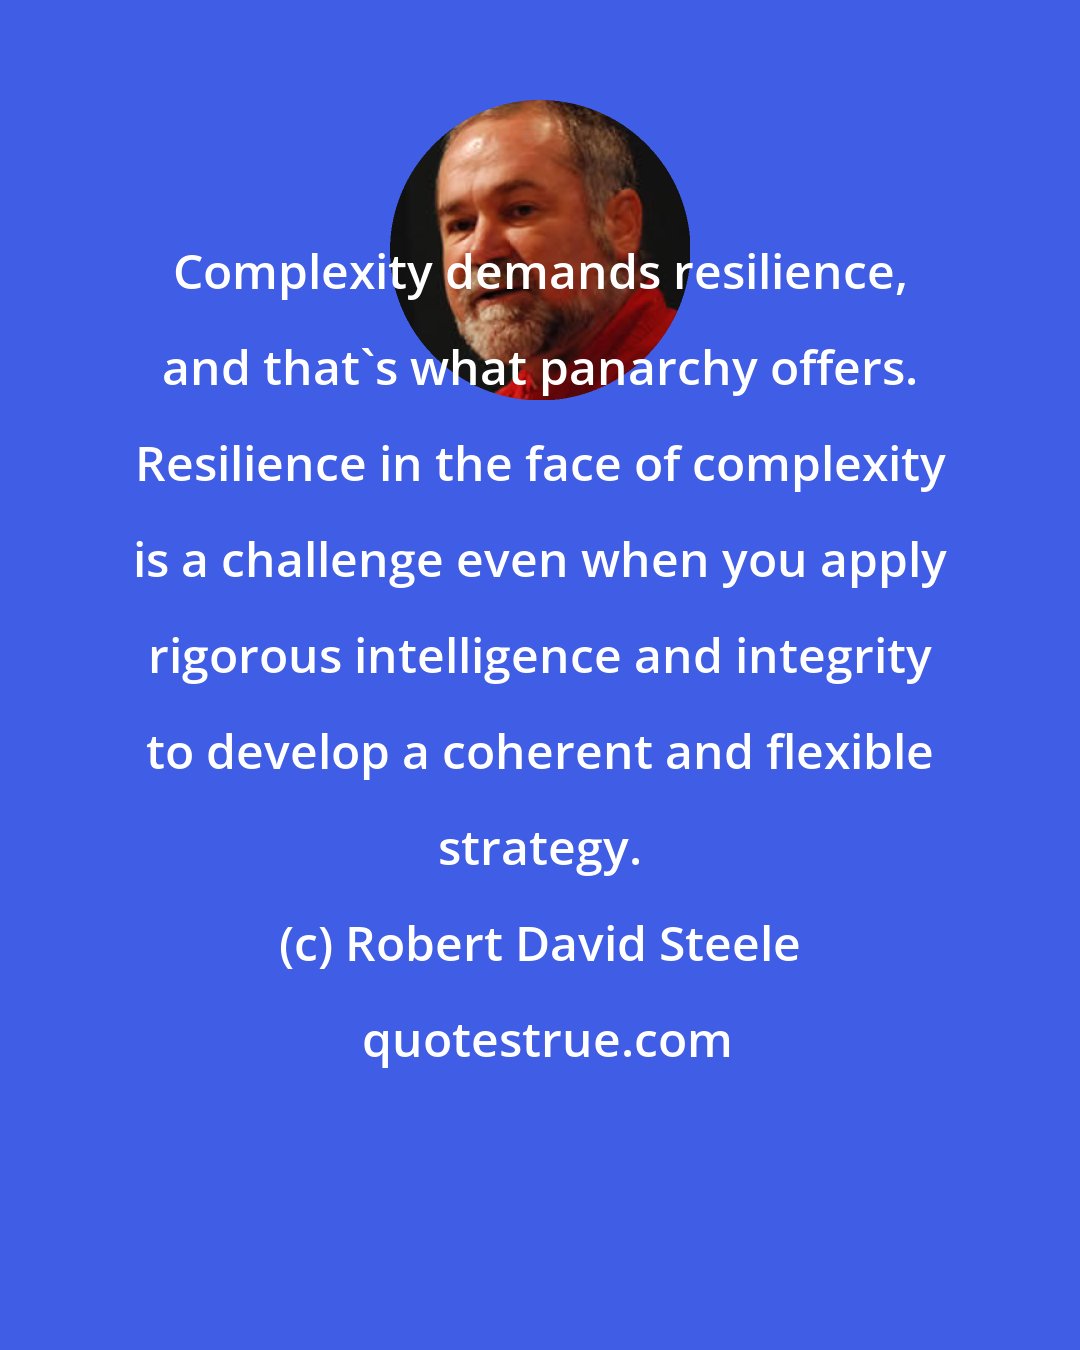 Robert David Steele: Complexity demands resilience, and that's what panarchy offers. Resilience in the face of complexity is a challenge even when you apply rigorous intelligence and integrity to develop a coherent and flexible strategy.